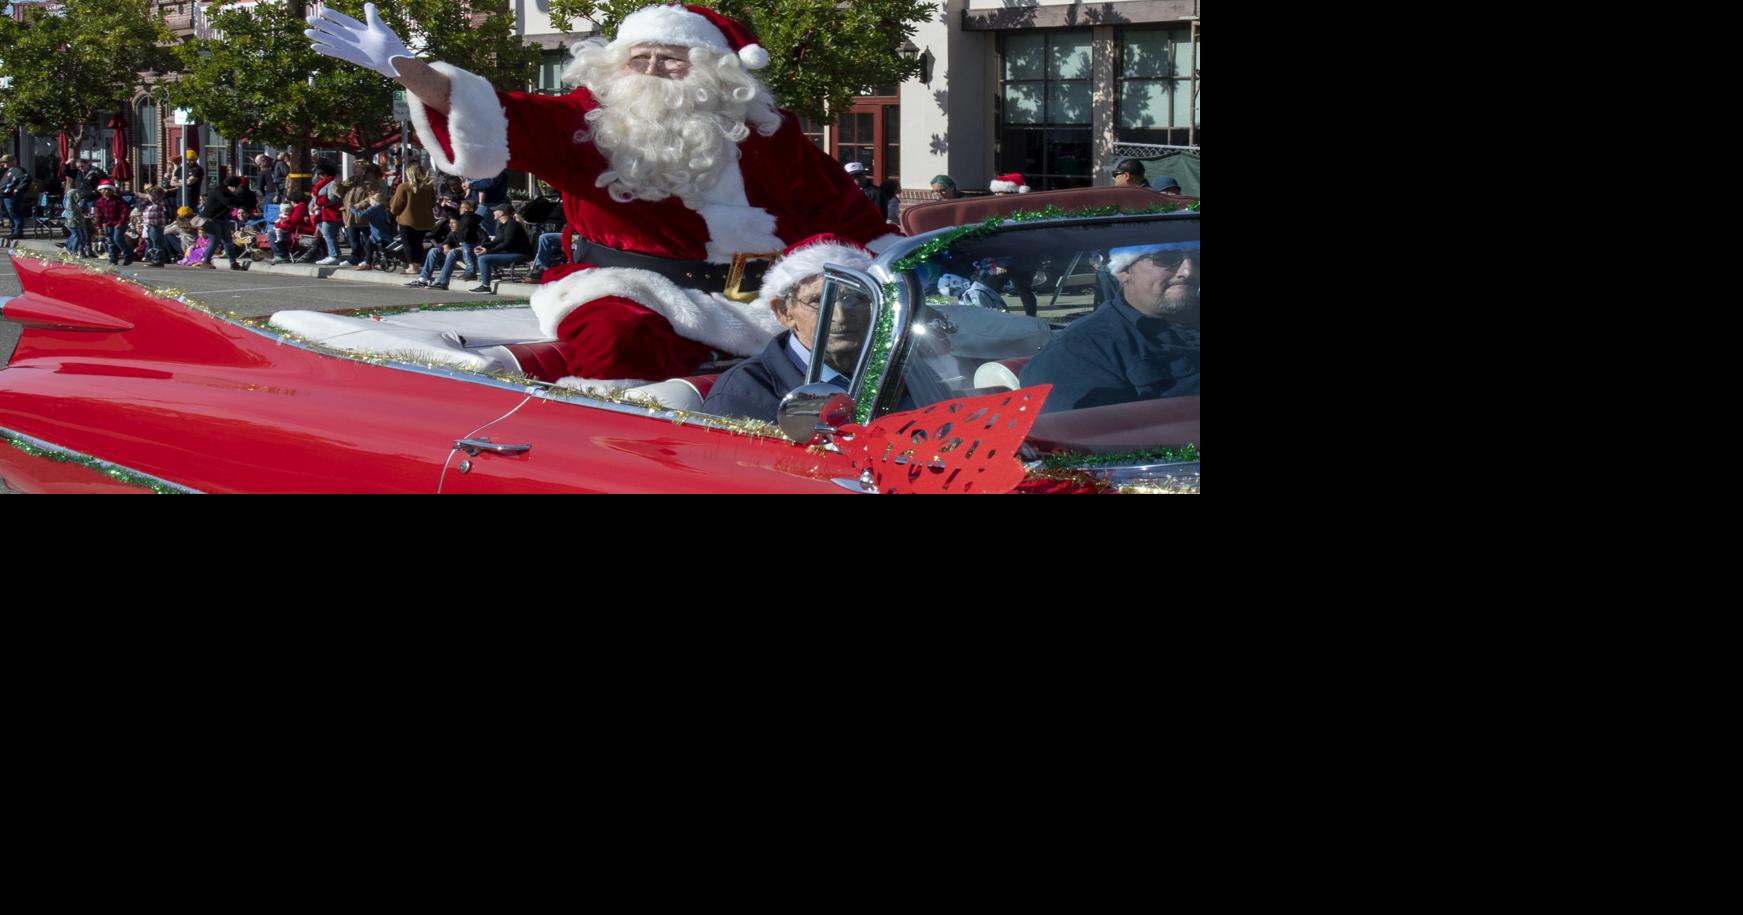 Old Town Orcutt Christmas Parade set for Saturday Local News